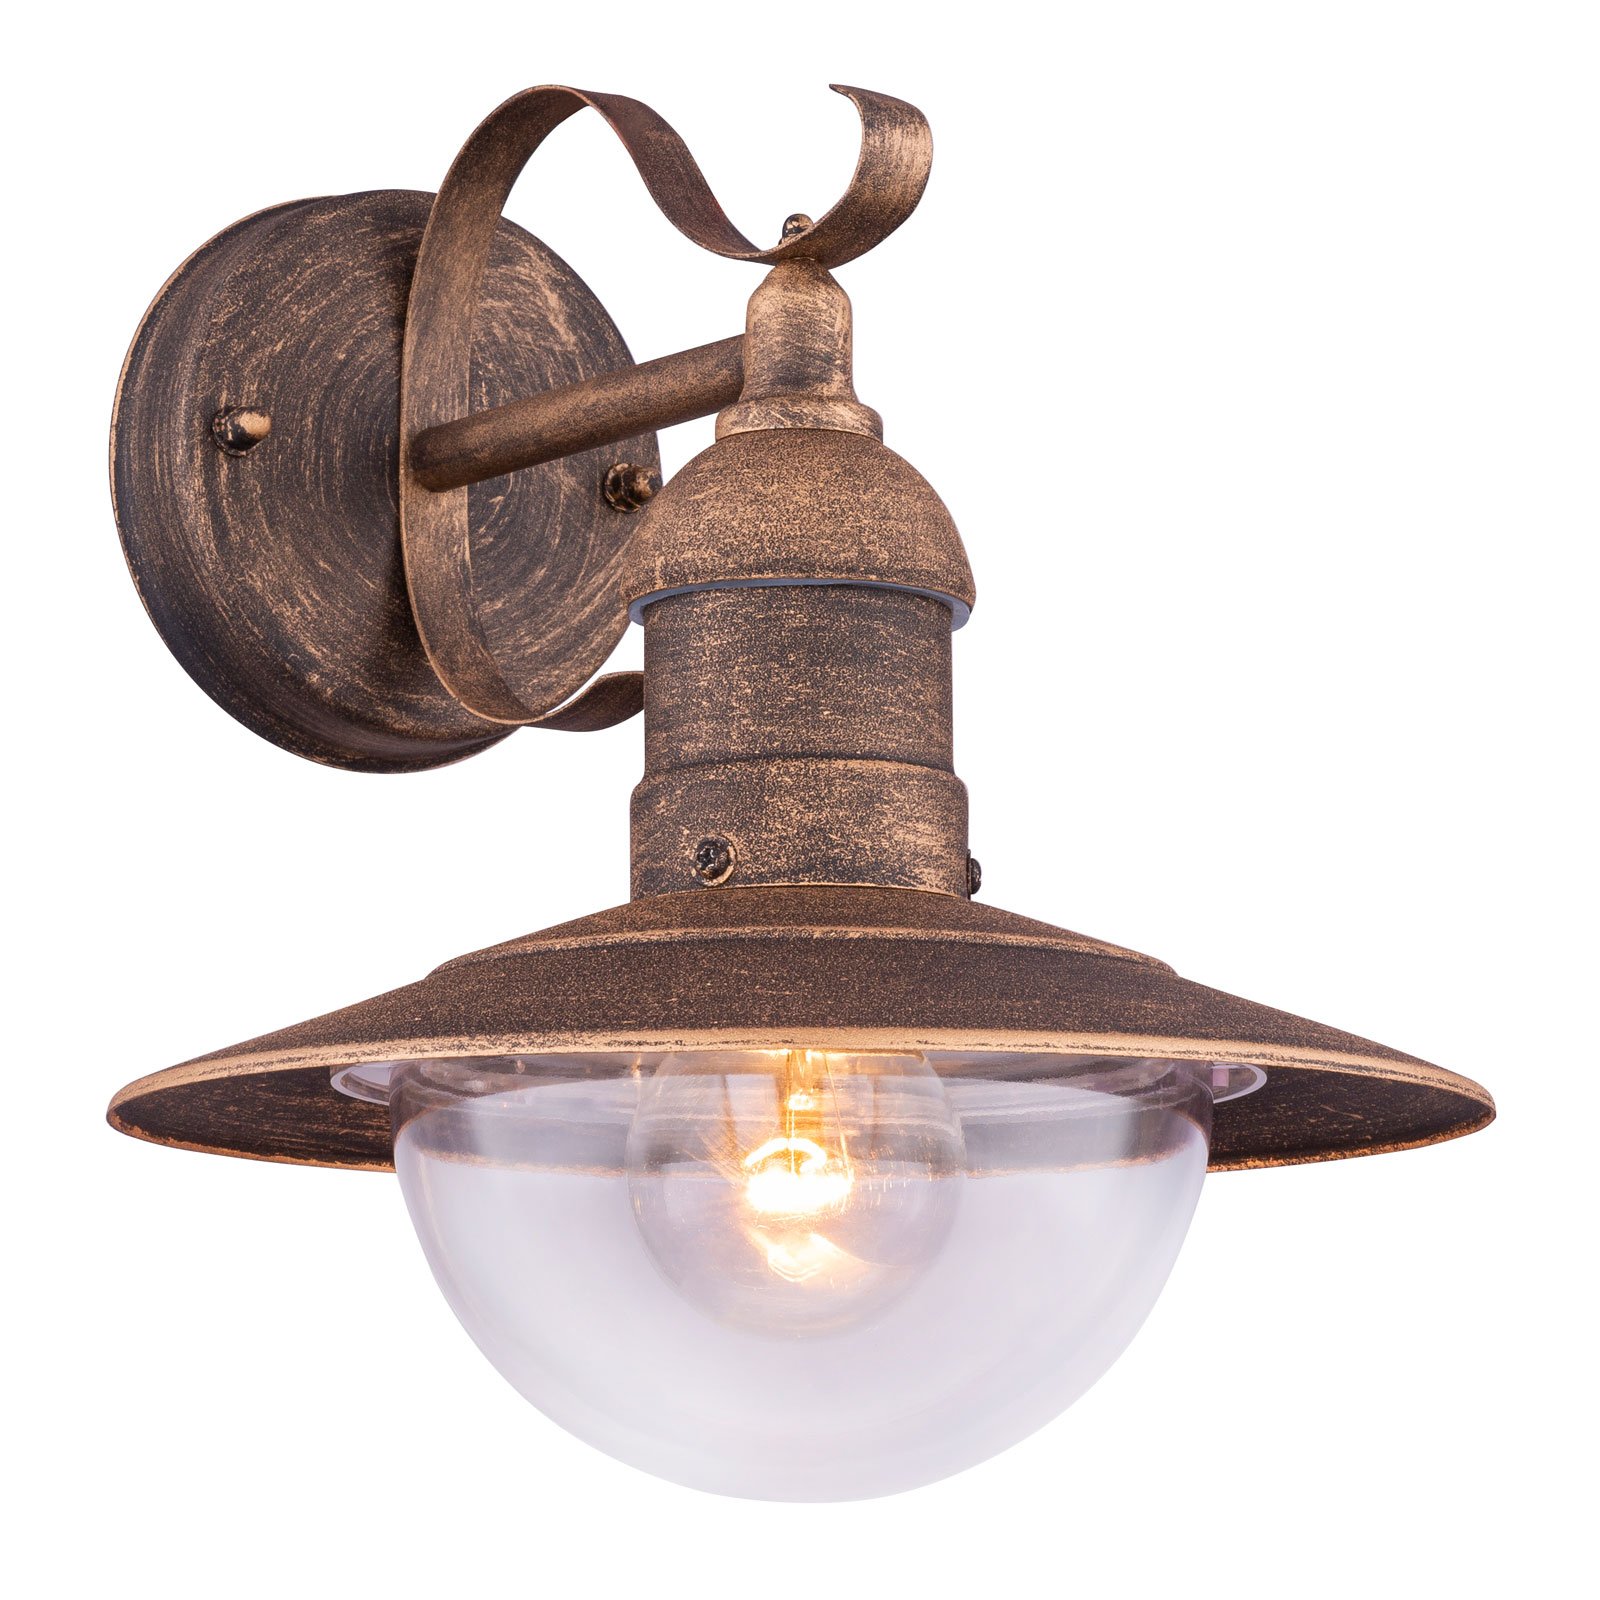 Linda outdoor wall light with a vintage rust look